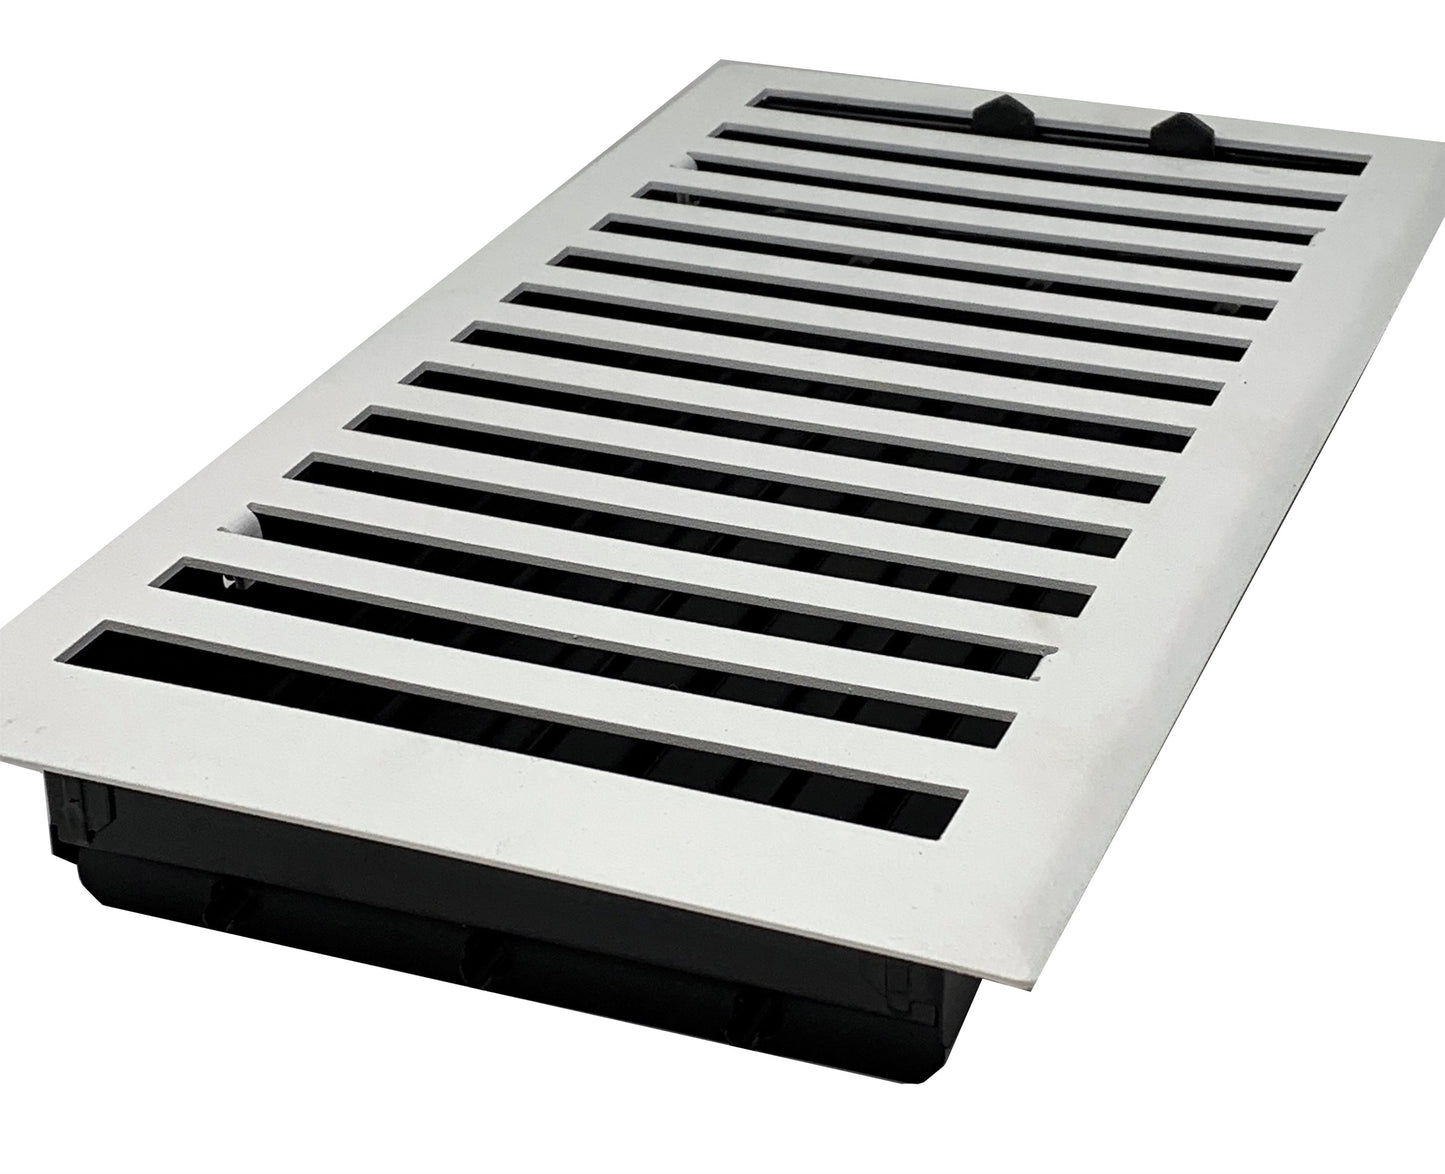 Steel Modern Chic Vent Covers - White